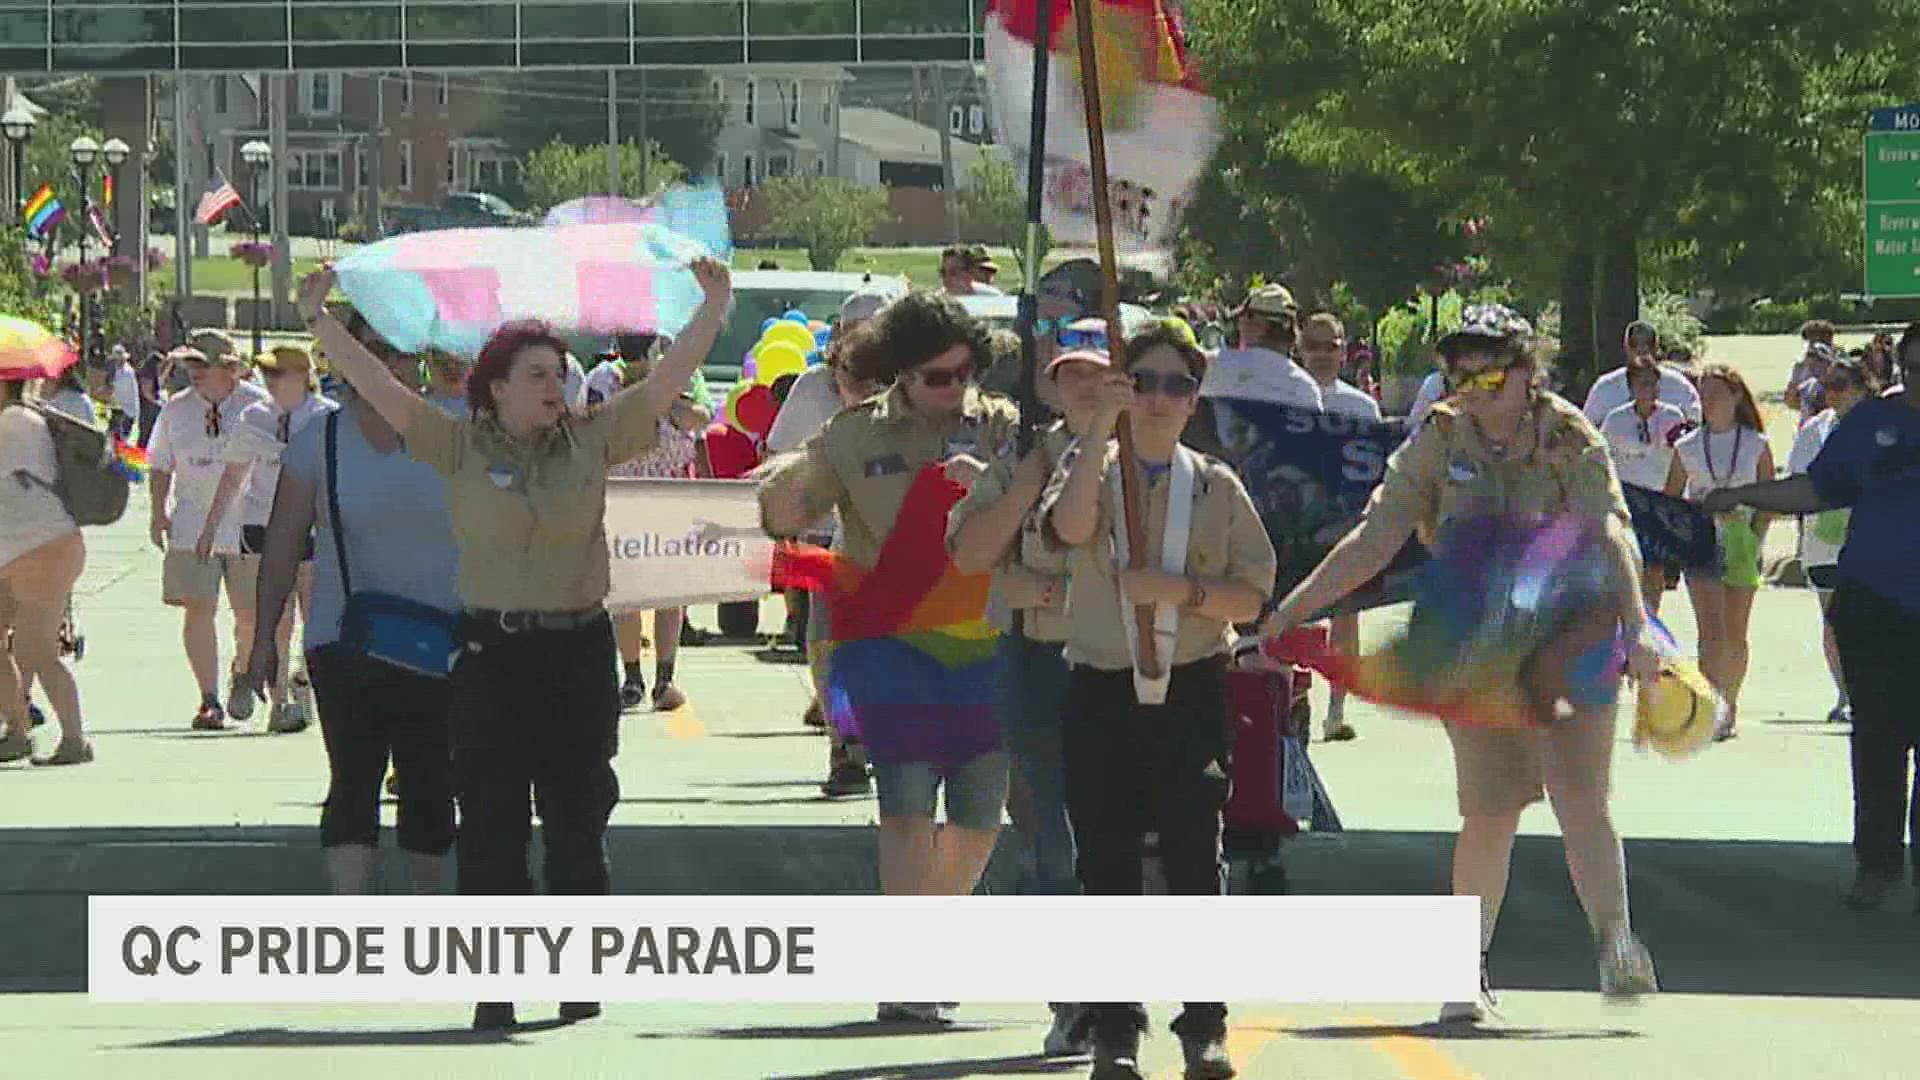 Around 20 organizations took part in QC Pride's annual pride parade on Saturday afternoon.